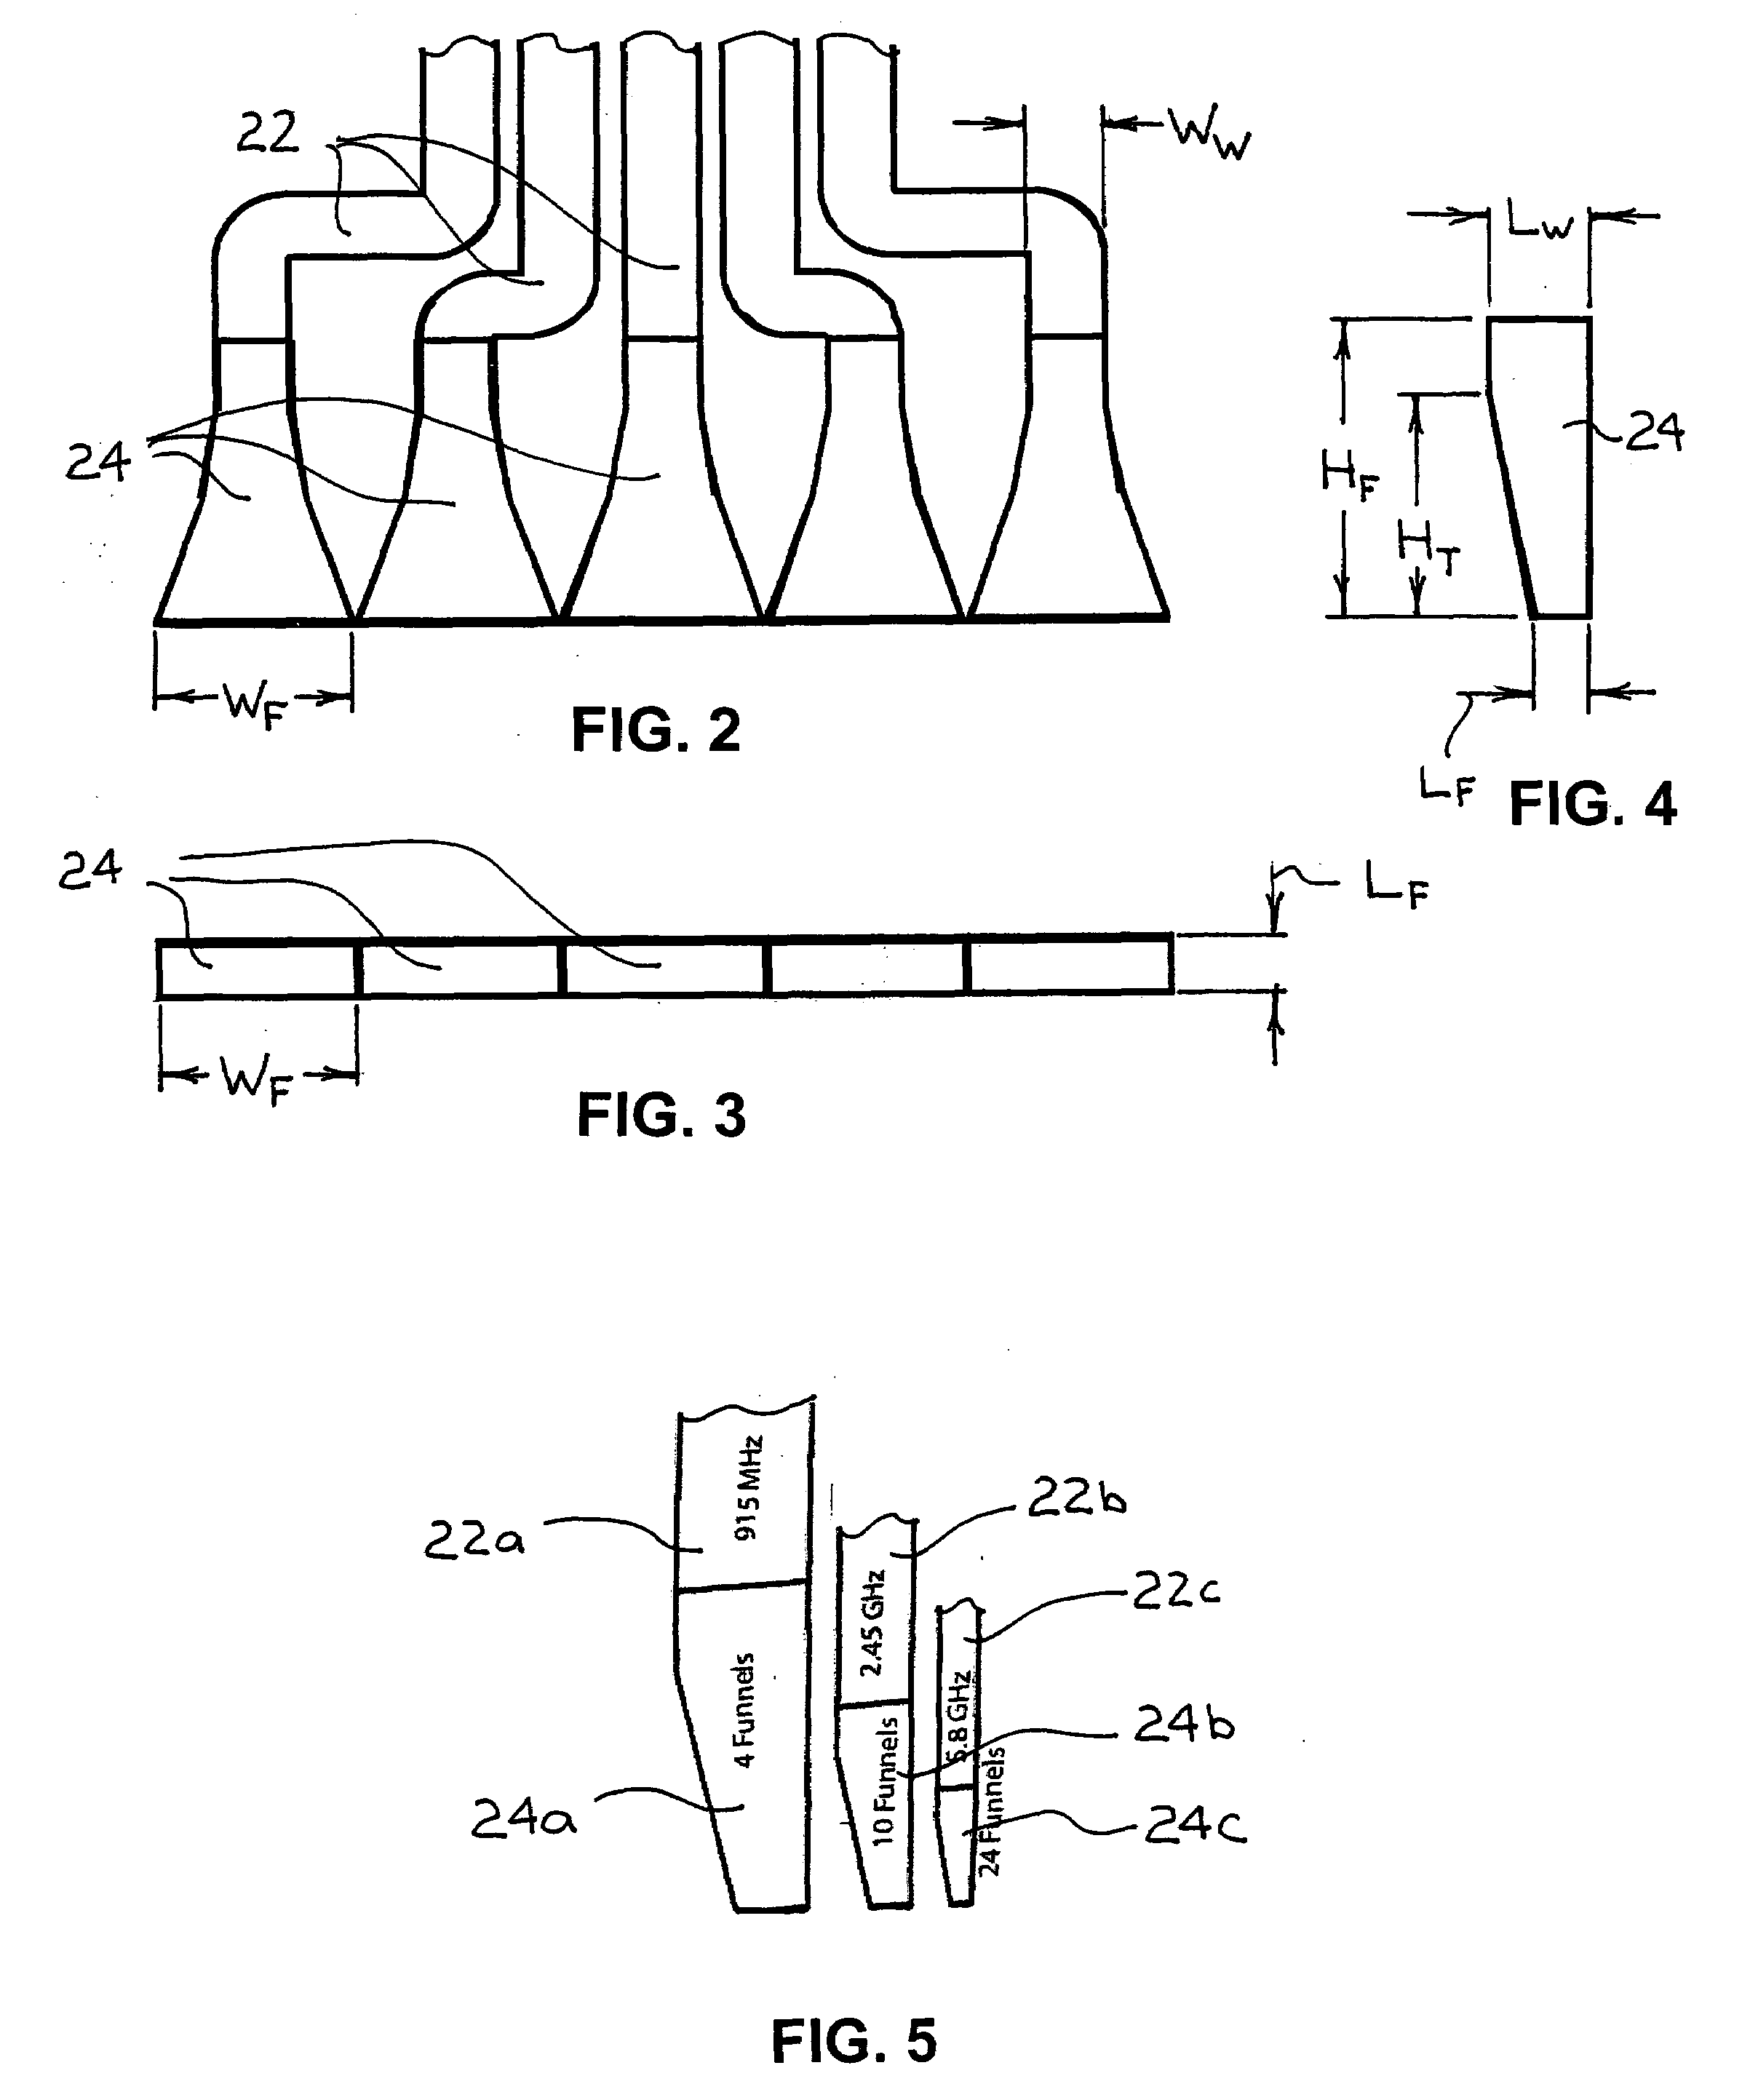 Apparatus and method for in-situ microwave consolidation of planetary materials containing nano-sized metallic iron particles